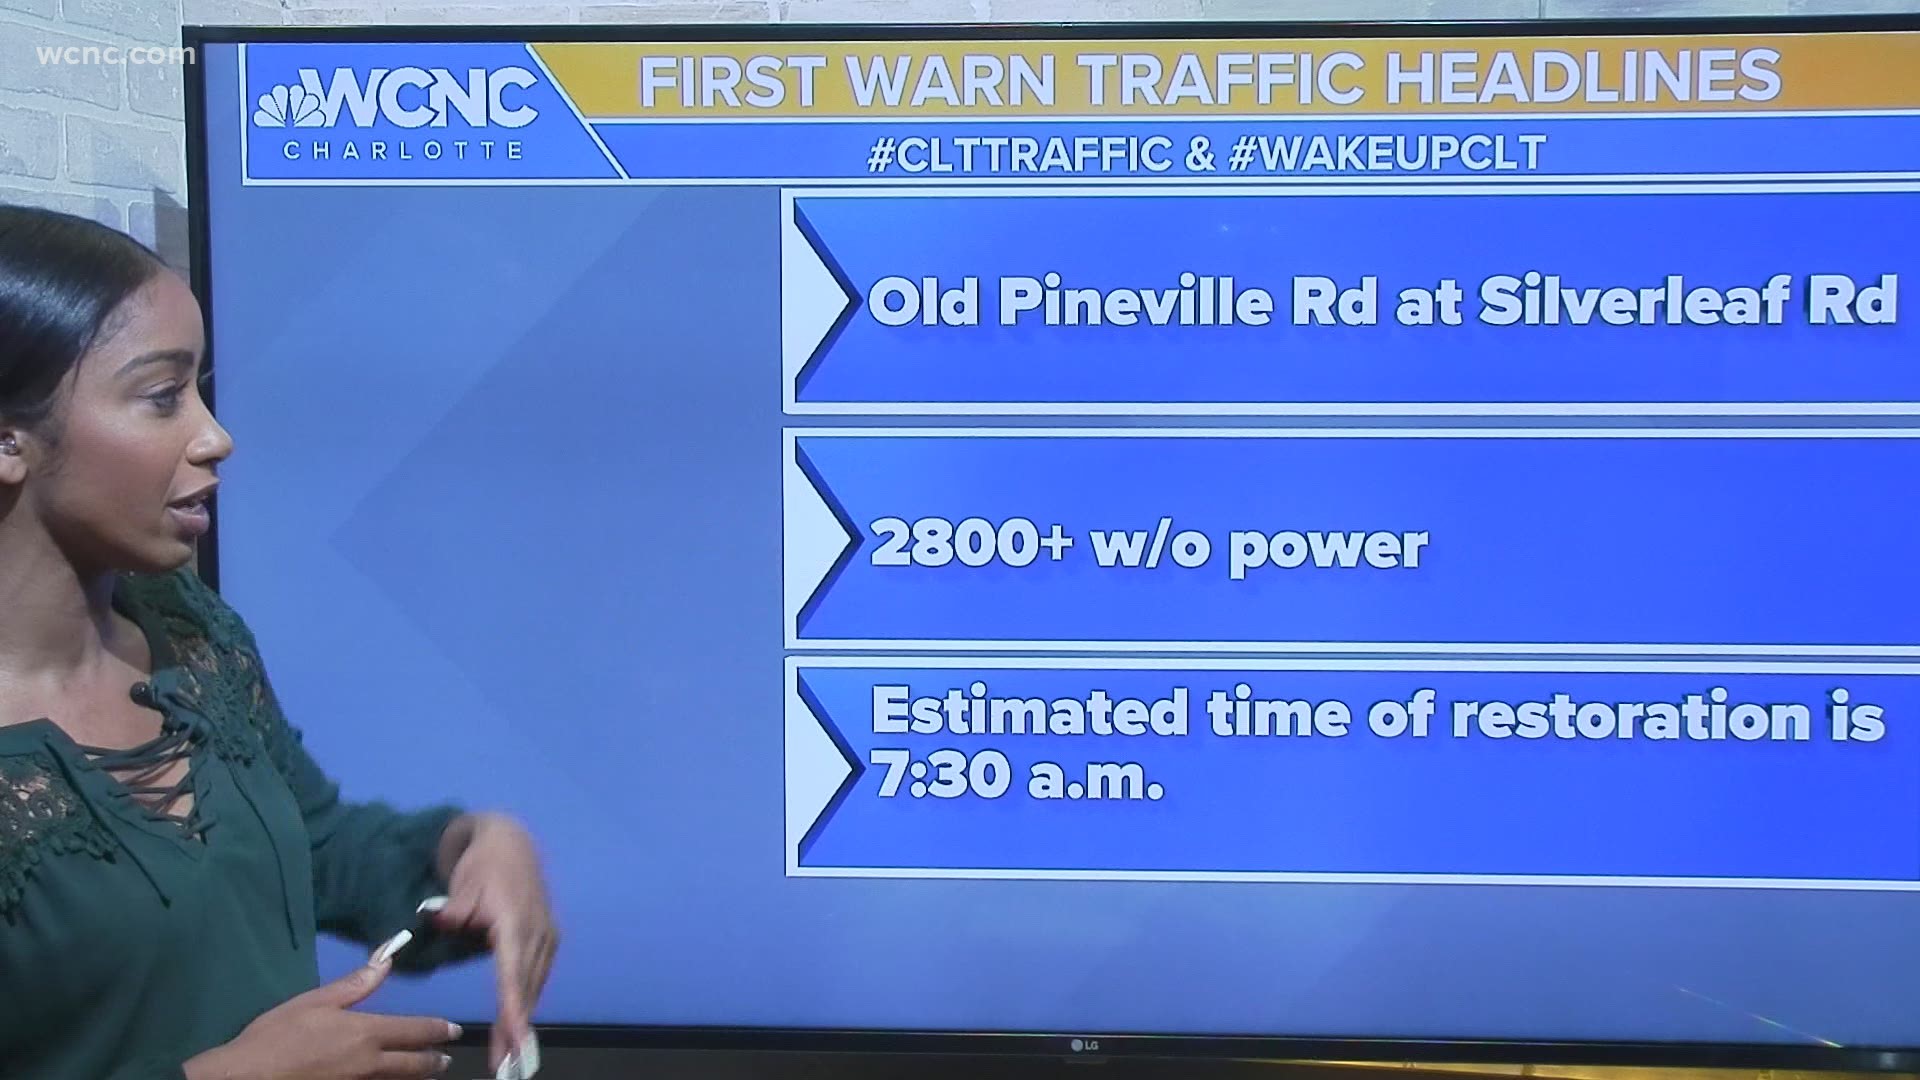 Hundreds of people are without power after a car crashed into a power pole in south Charlotte early Monday morning.